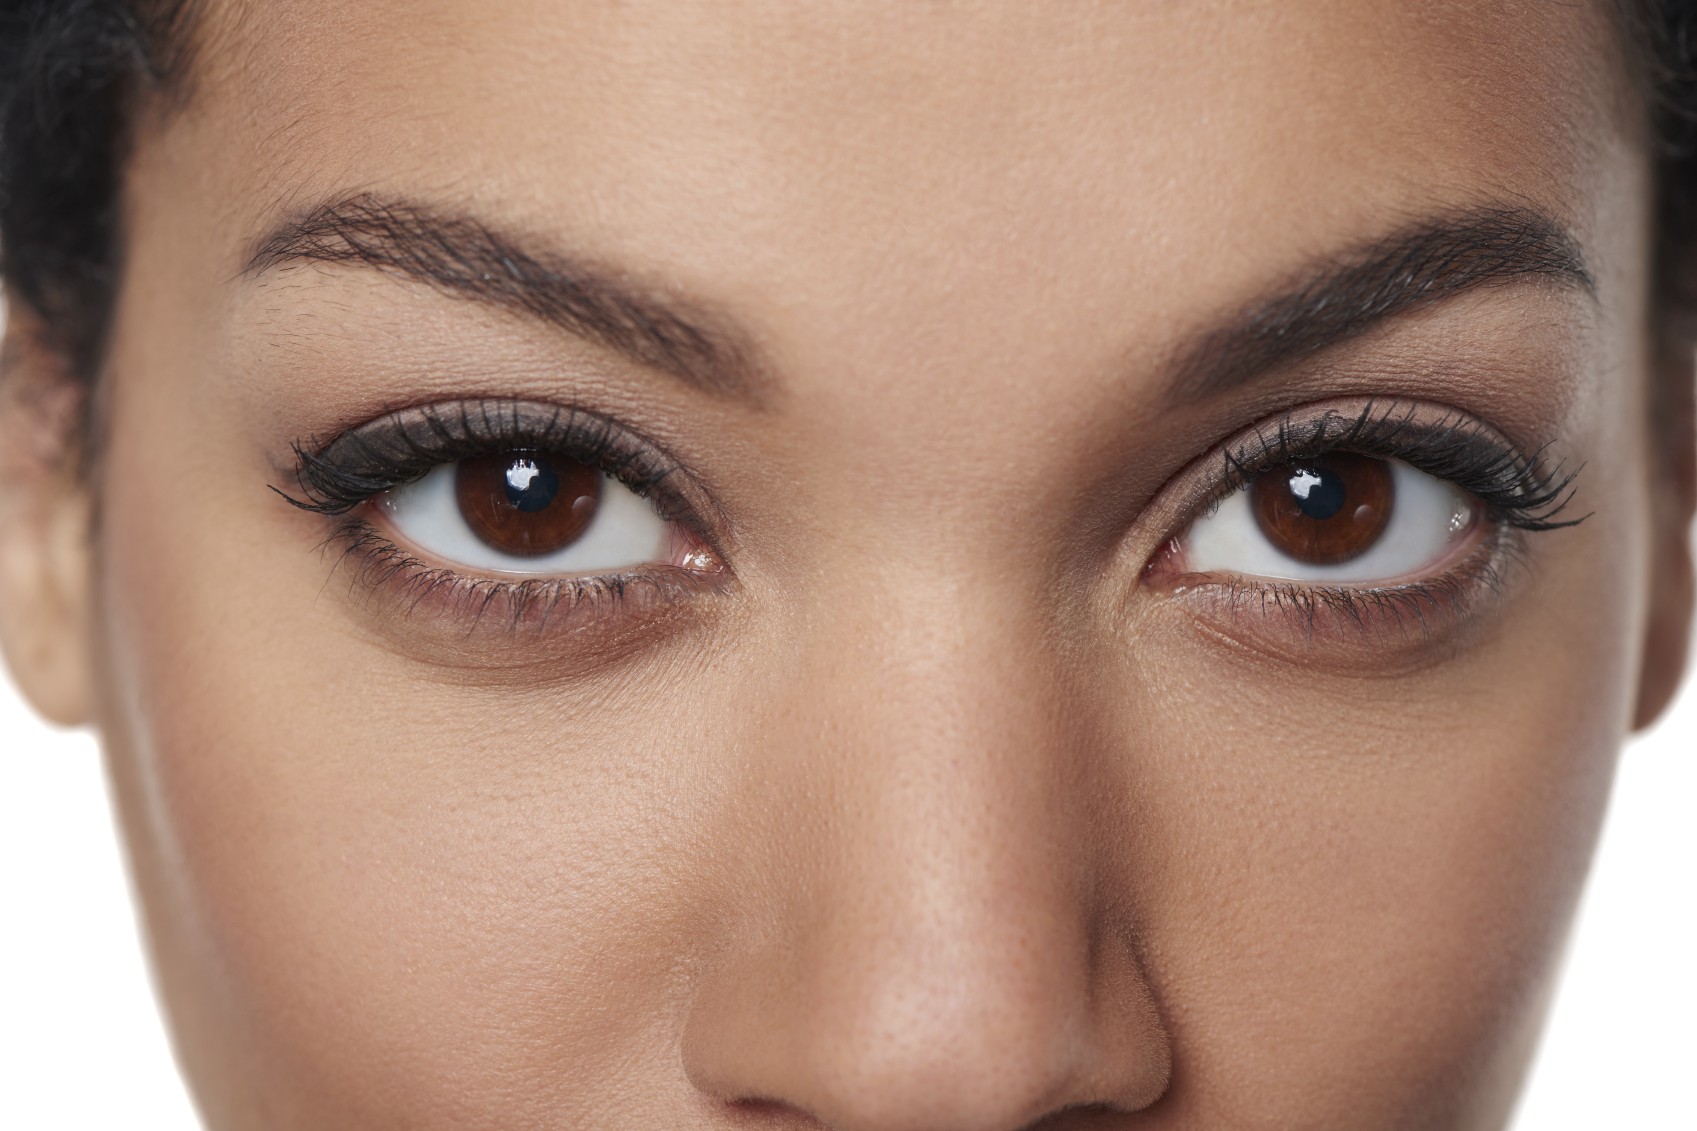 10 Facts About Eyebrow Enhancements with Hair Transplants